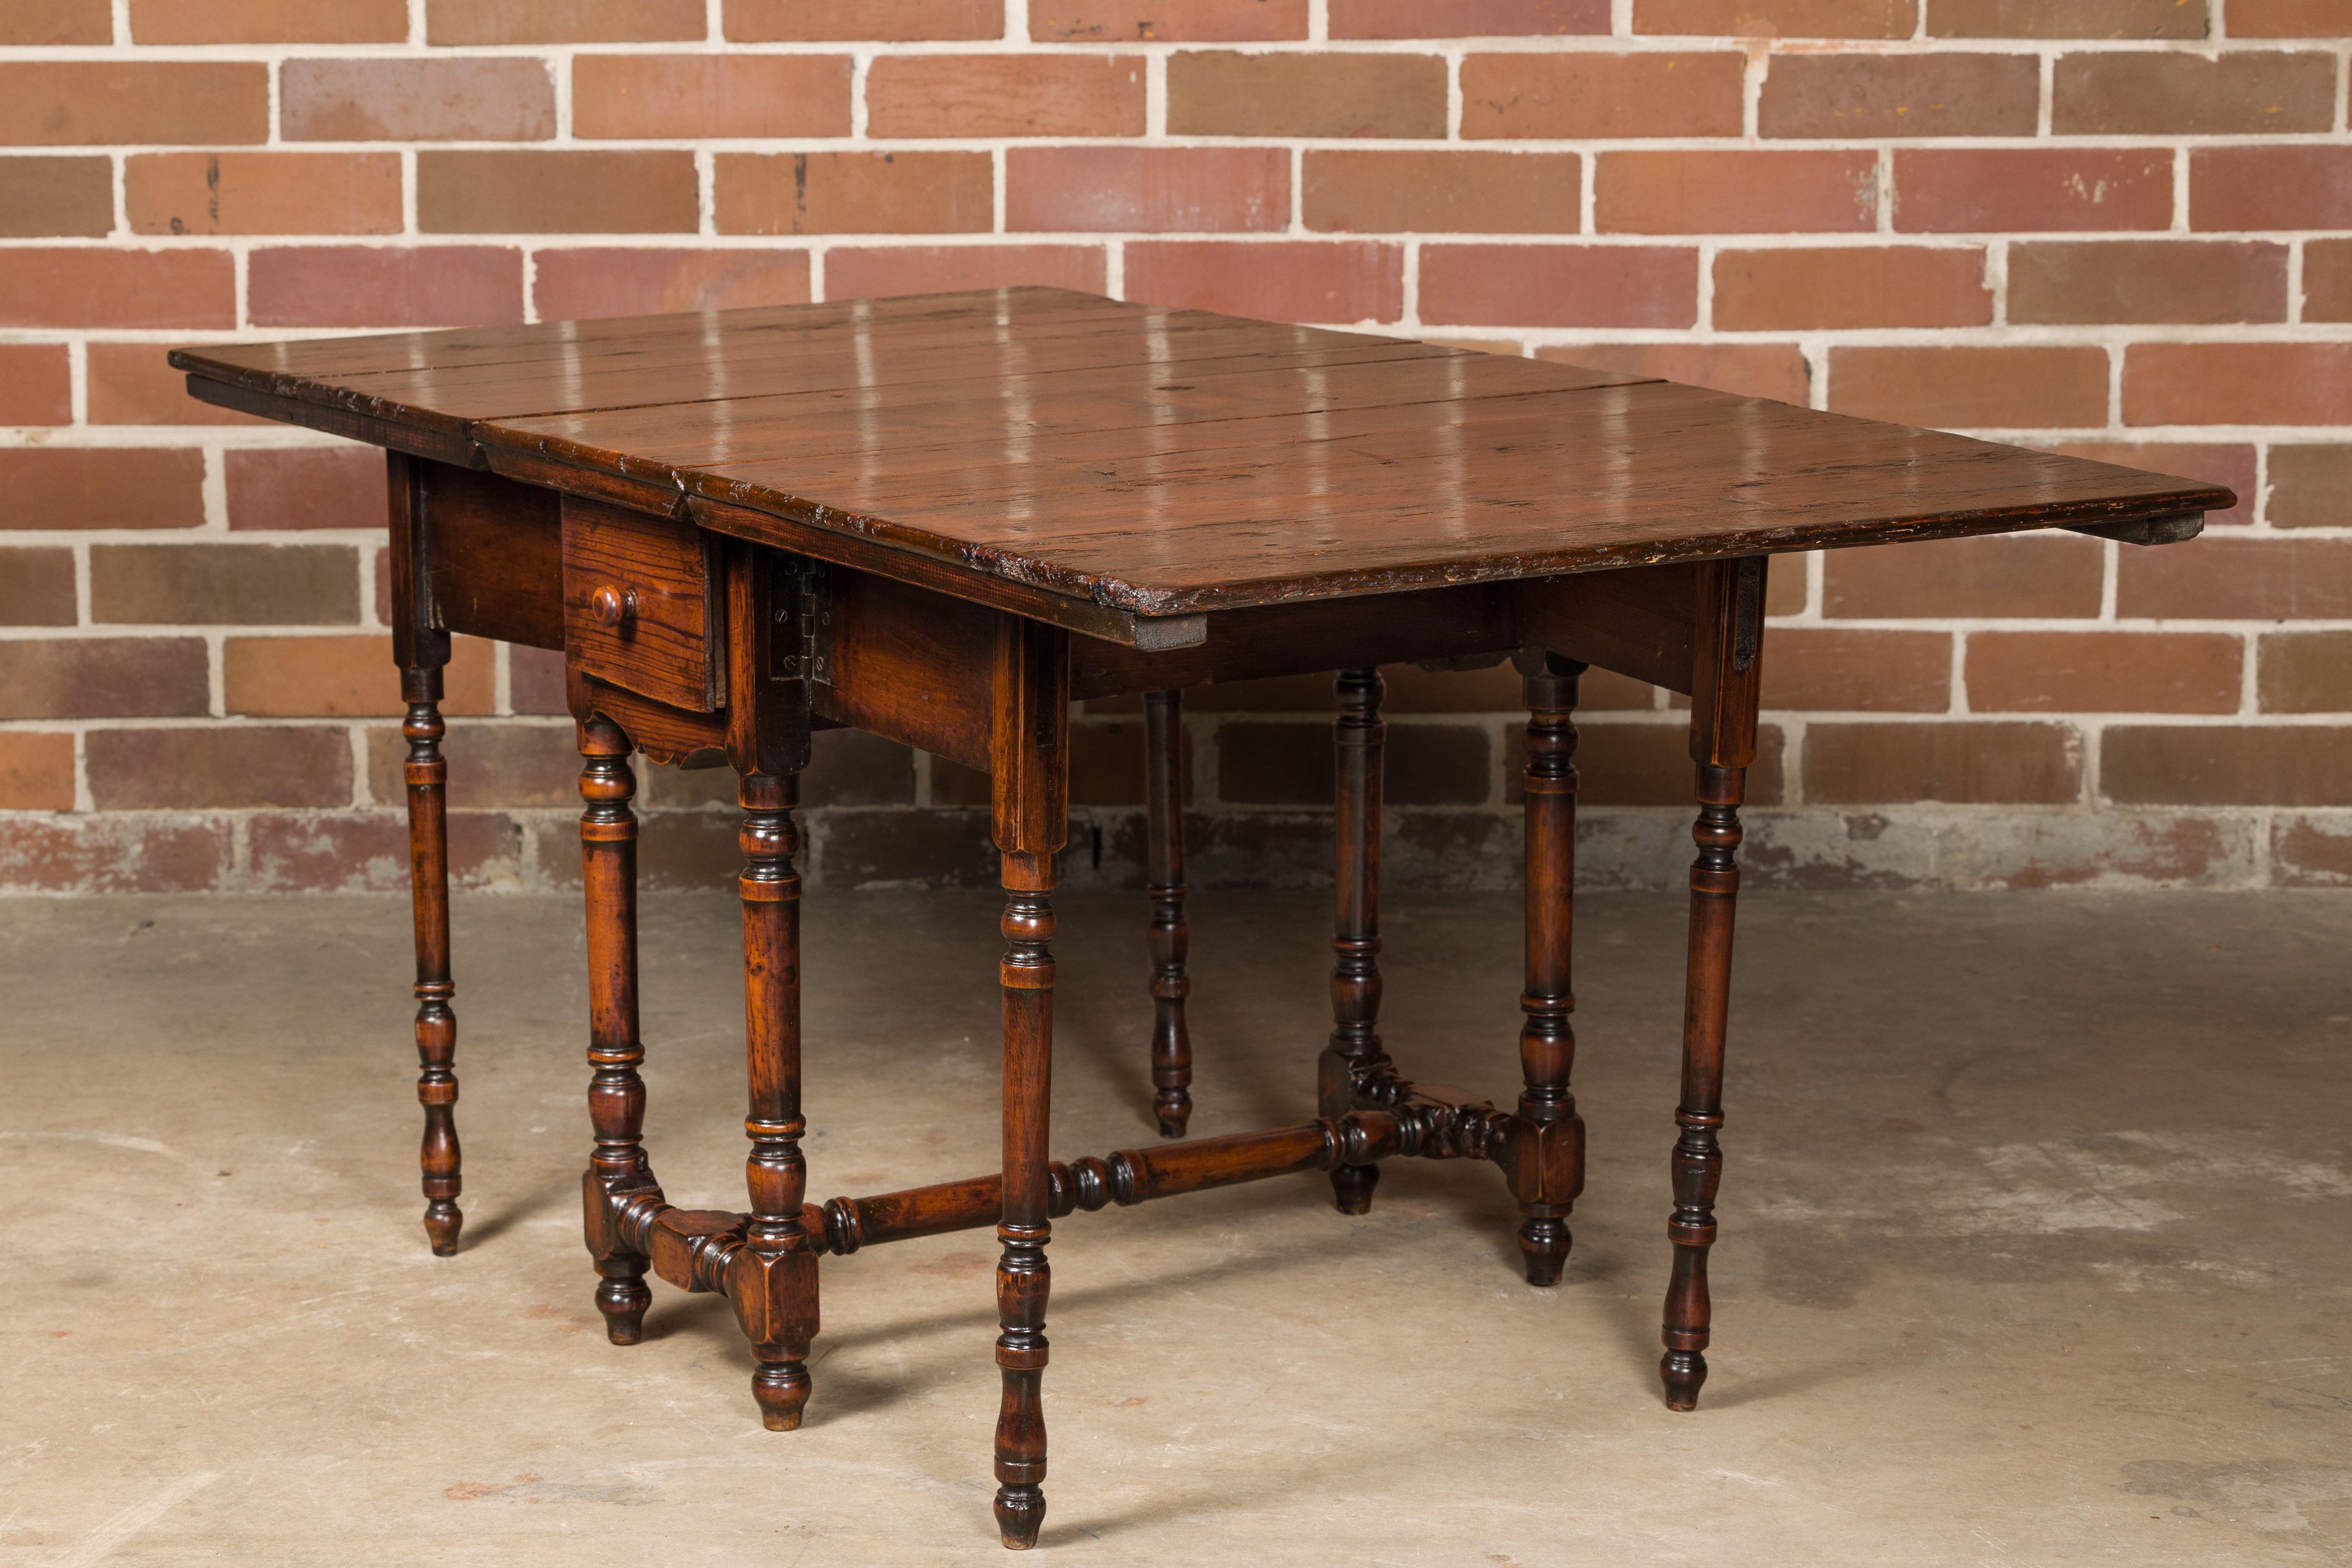 English 19th Century Oak Drop Leaf Table with Turned Legs and Two Drawers In Good Condition For Sale In Atlanta, GA